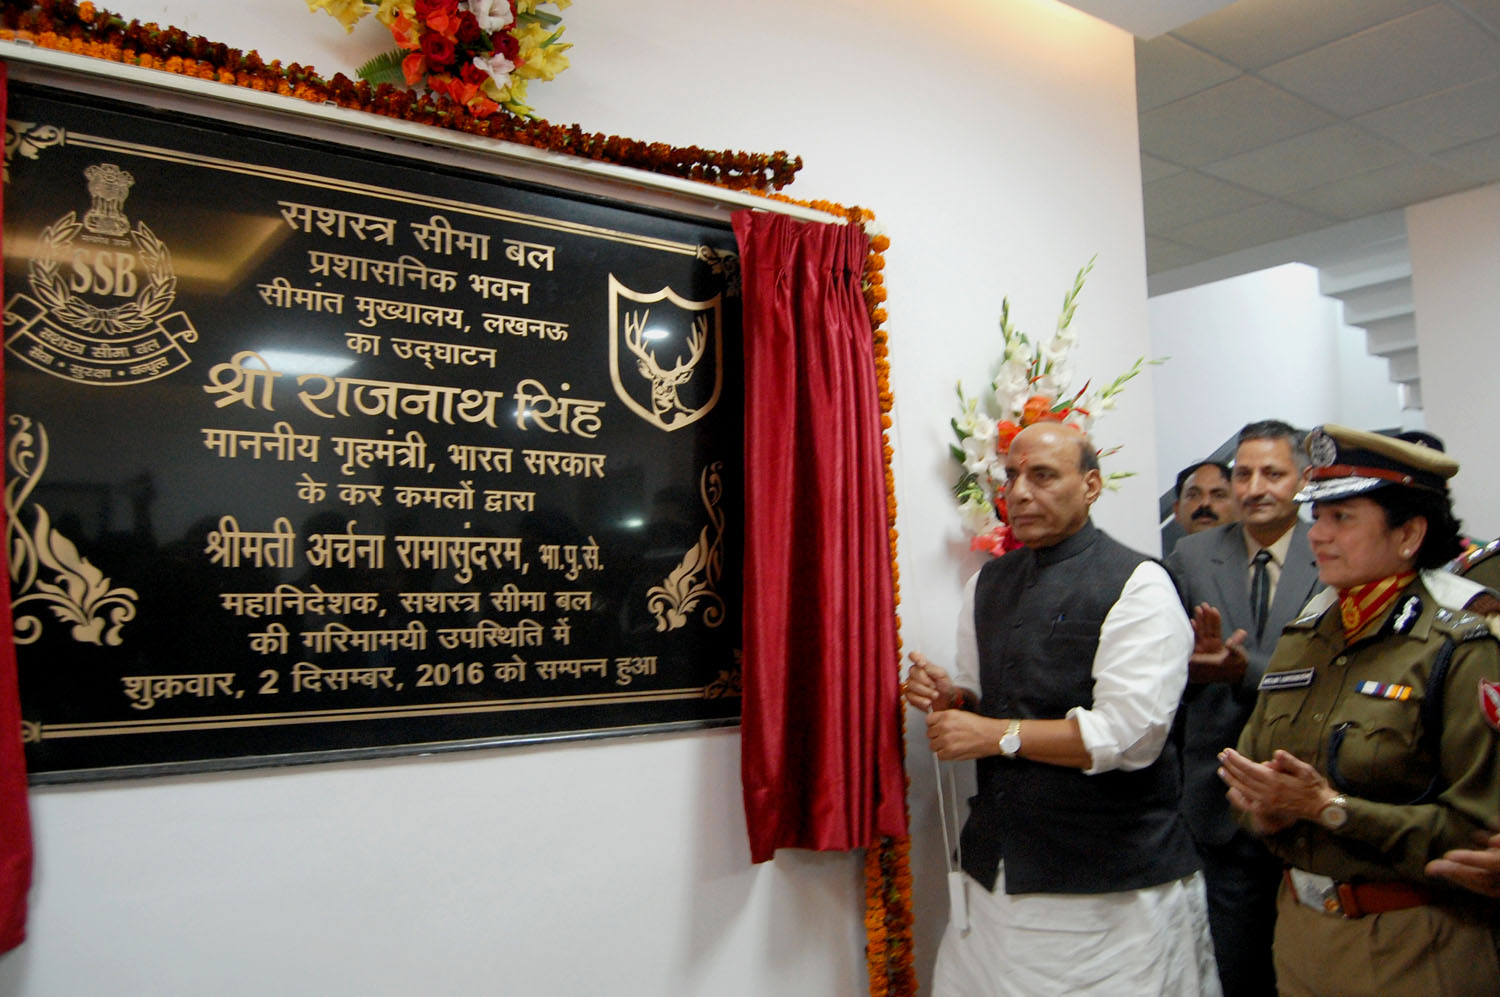 The Union Home Minister, Shri Rajnath Singh inaugurating the Administrative building of the Sashastra Seema Bal, in Lucknow on December 02, 2016. The DG, SSB, Smt. Archana Ramasundaram is also seen.